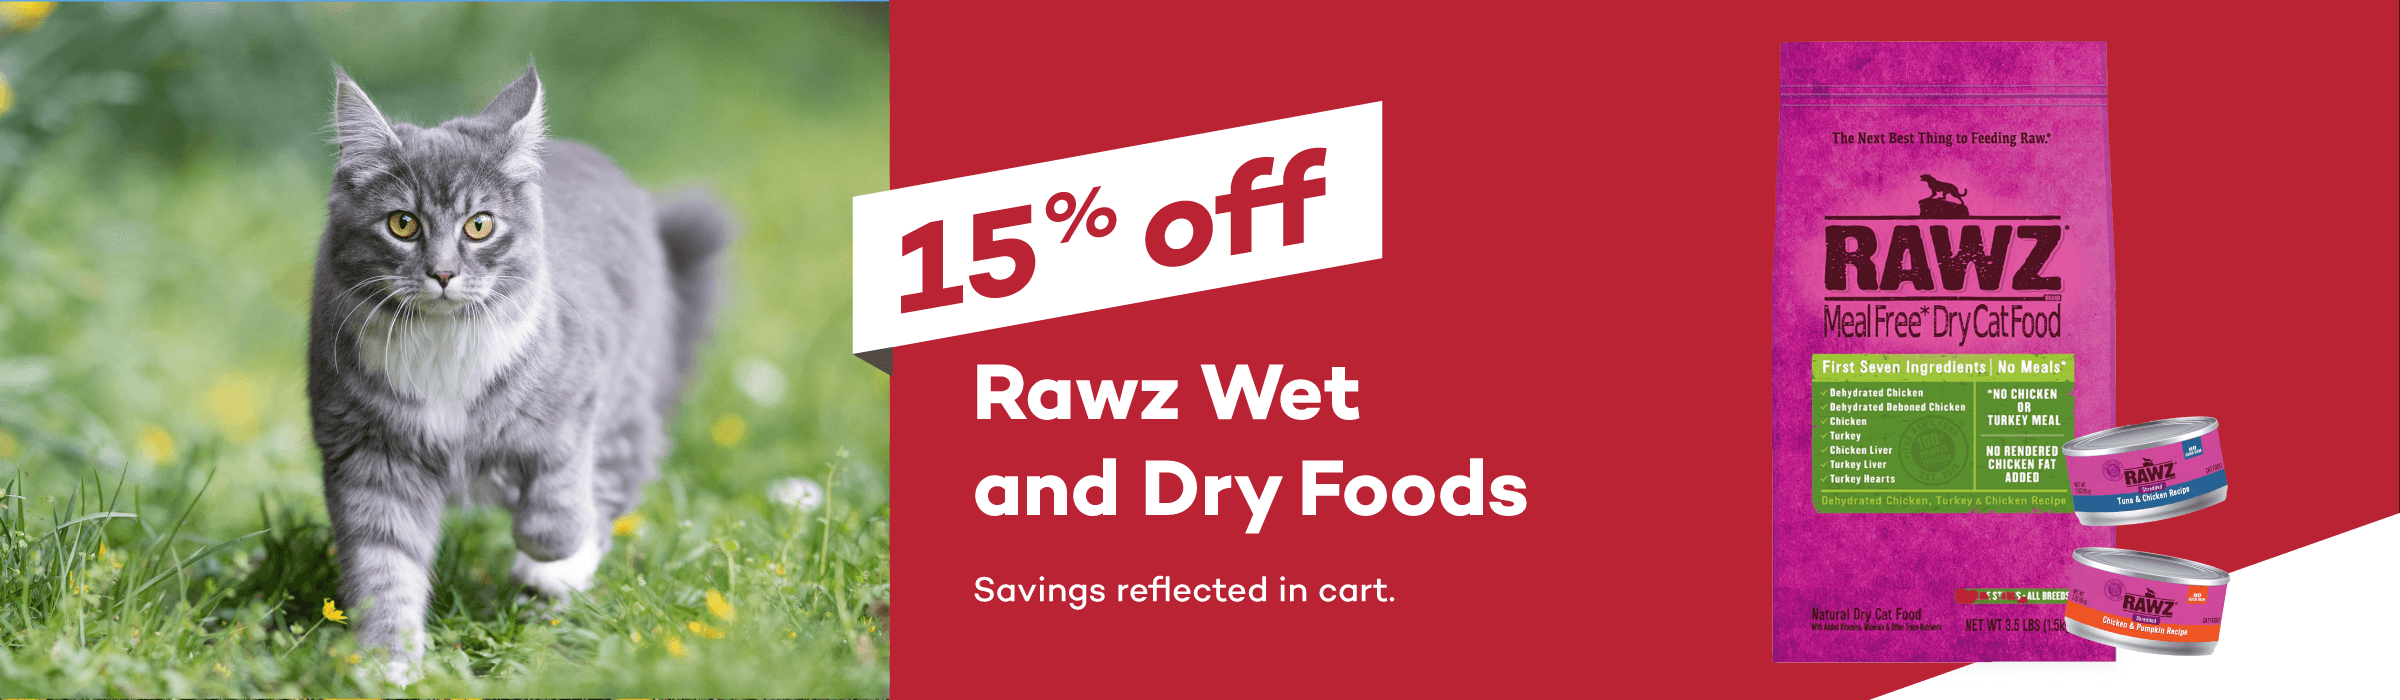 15% off Rawz Wet and Dry Foods. Savings reflected in cart.